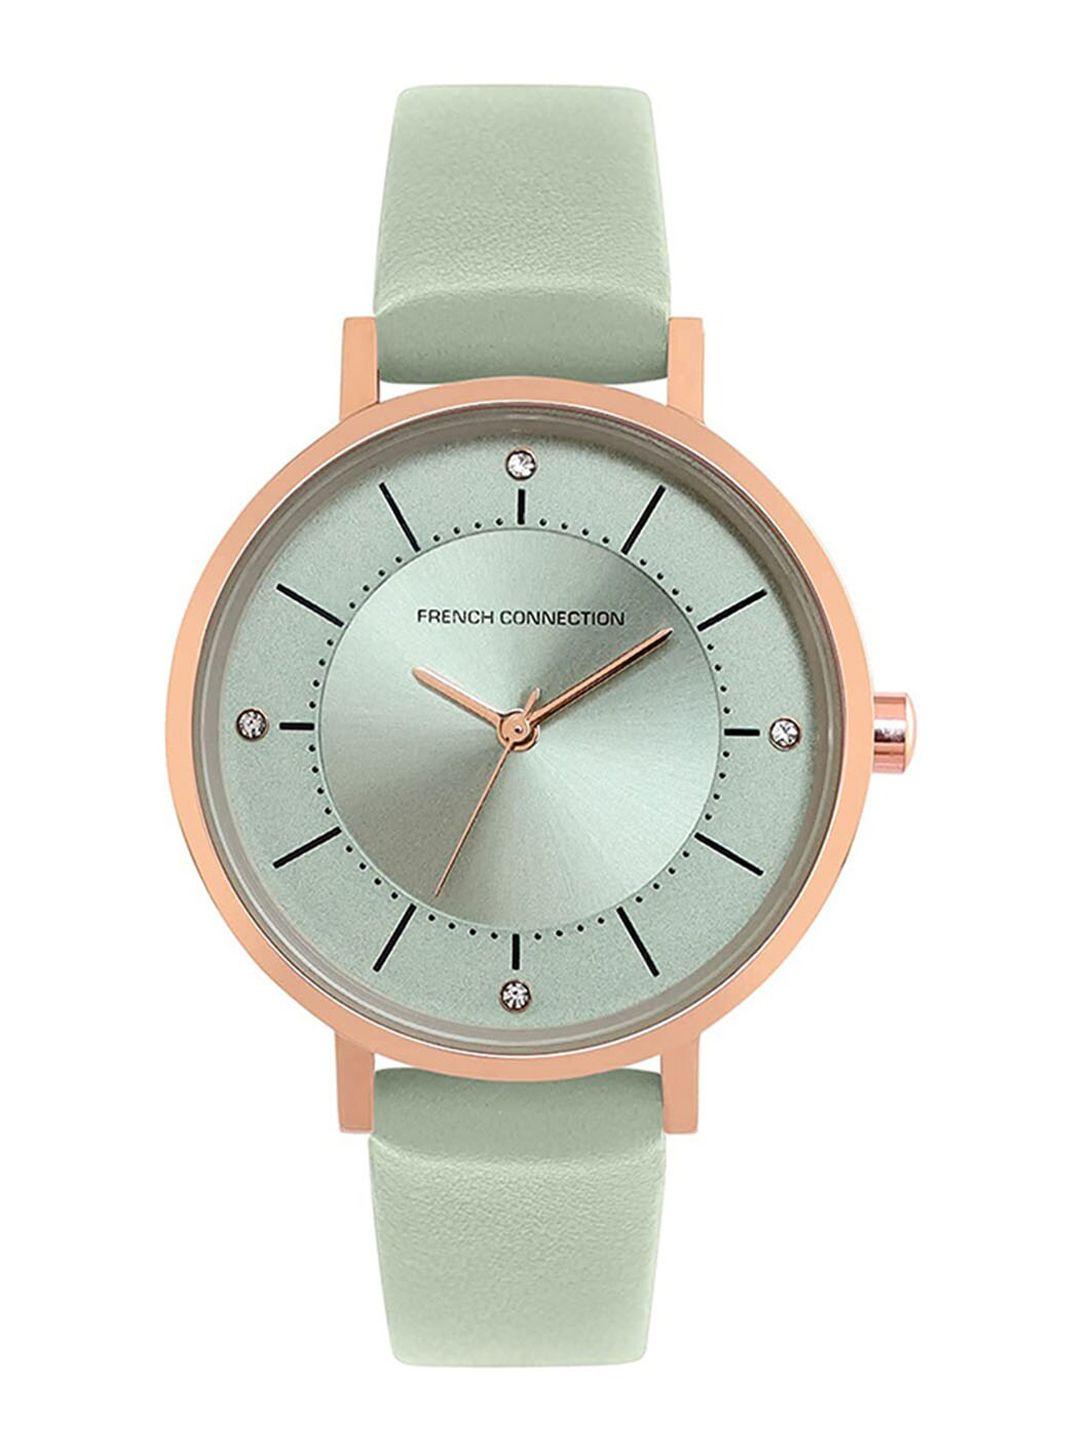 french-connection-embellished-dial-&-leather-straps-analogue-watch-fcn00010b